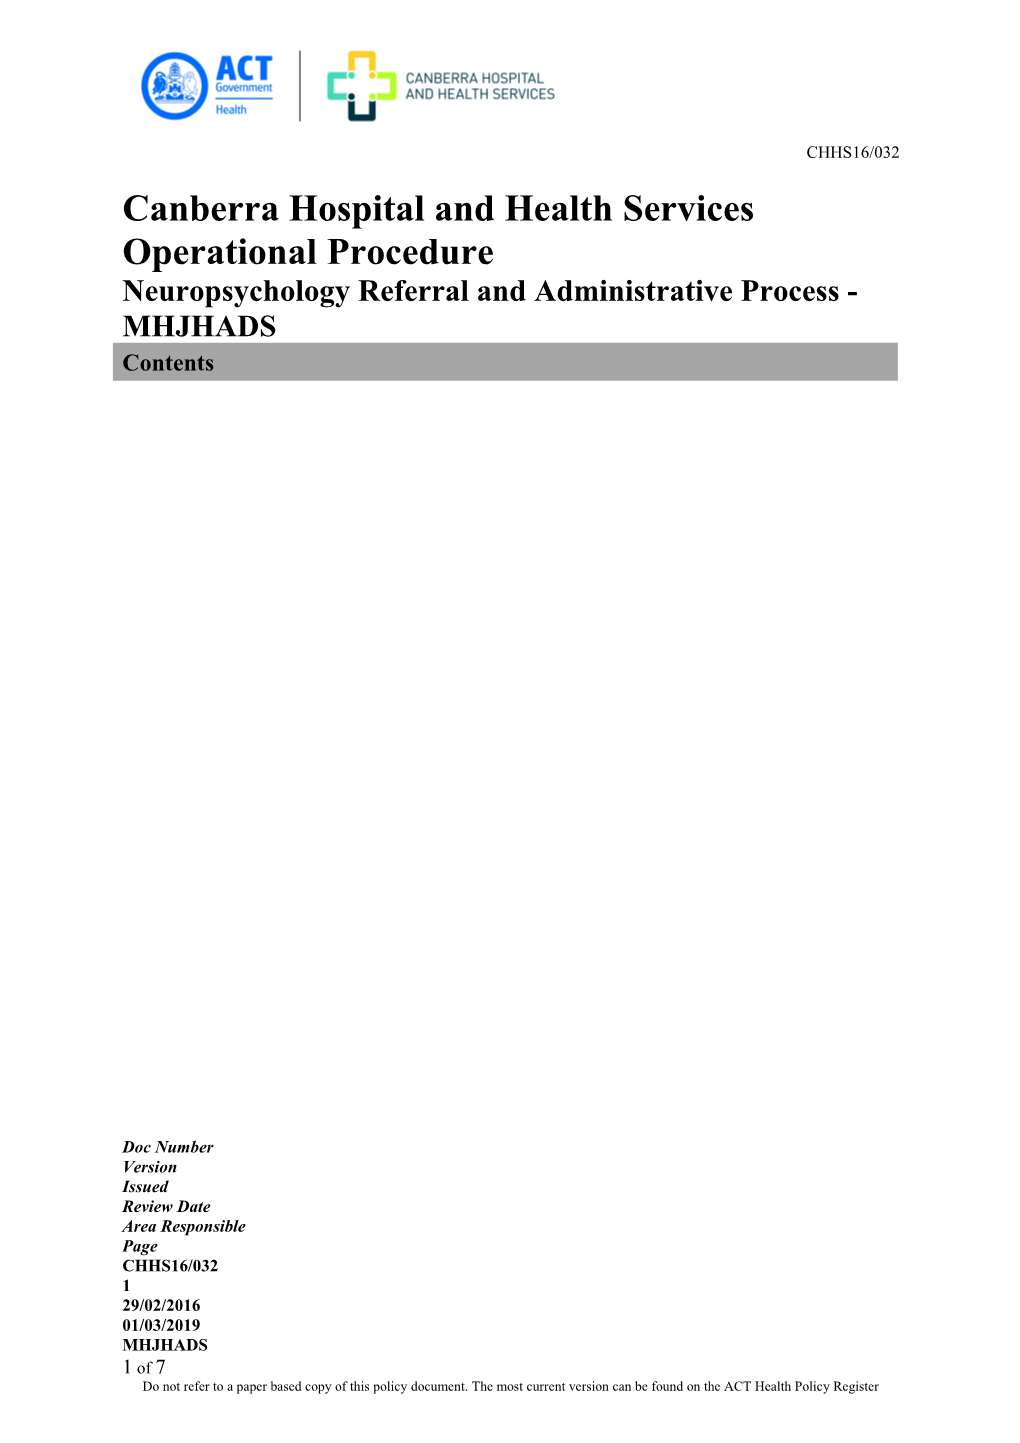 Neuropsychology Referral and Administrative Process